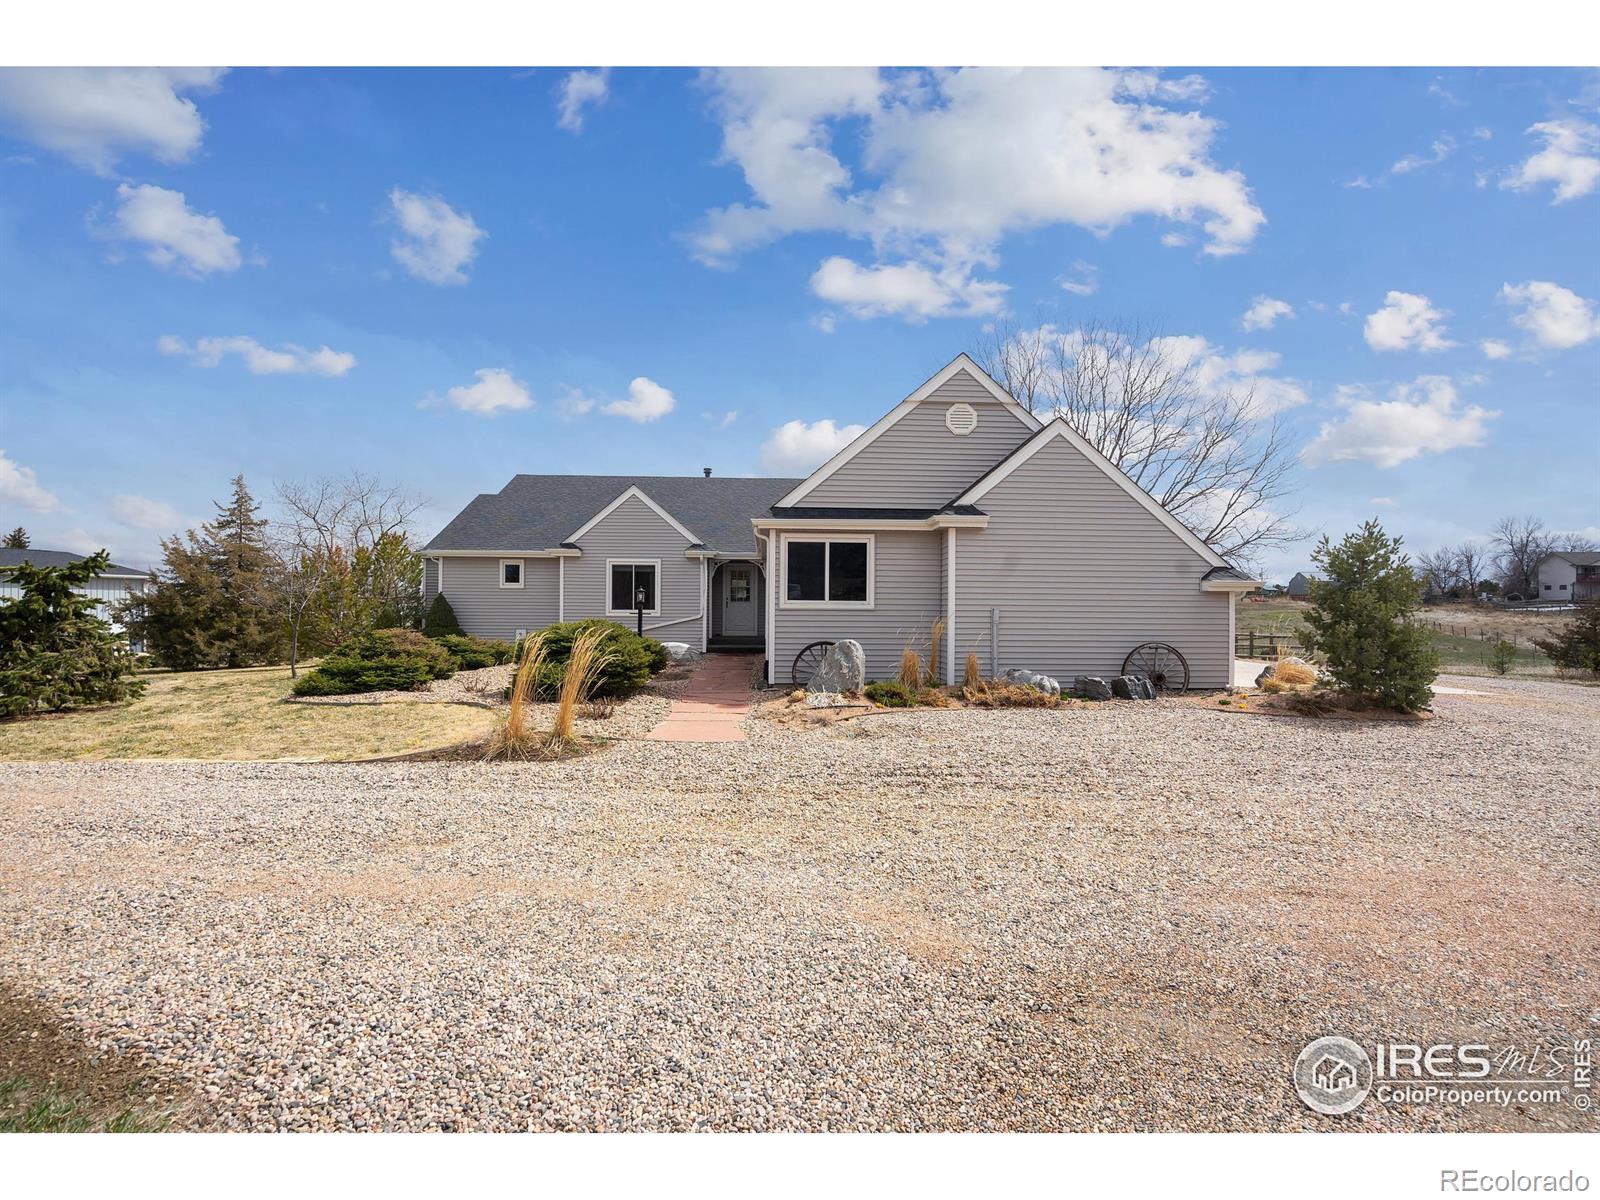 4909  gary drive, Berthoud sold home. Closed on 2024-05-03 for $1,050,000.